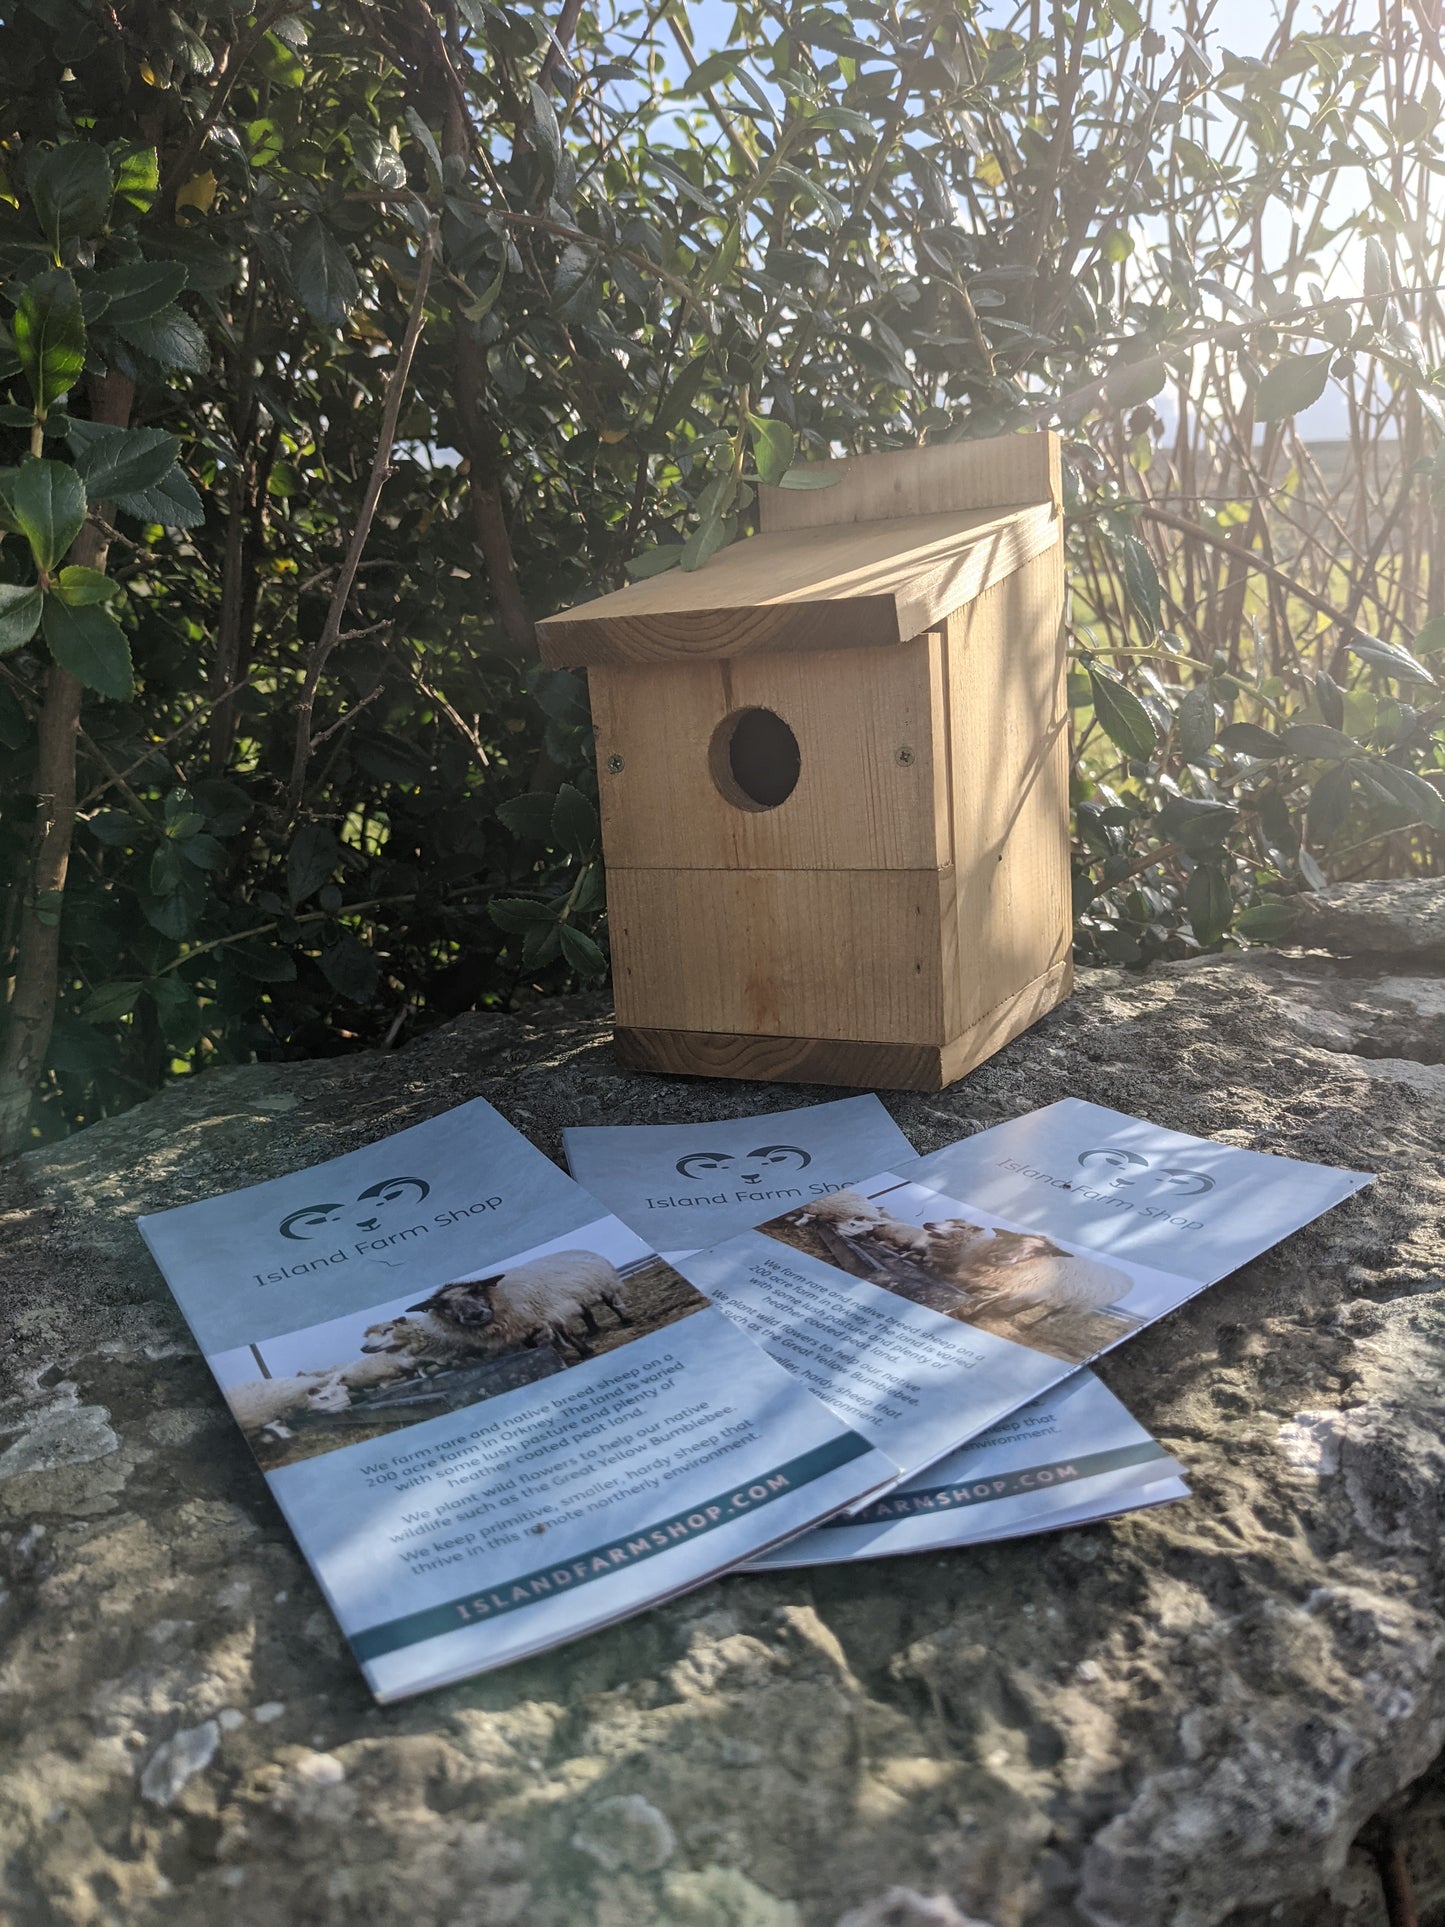 Johnston and Jeff Multinester Bird Box, suitable for many small garden birds. This image shows the removable panel on the box